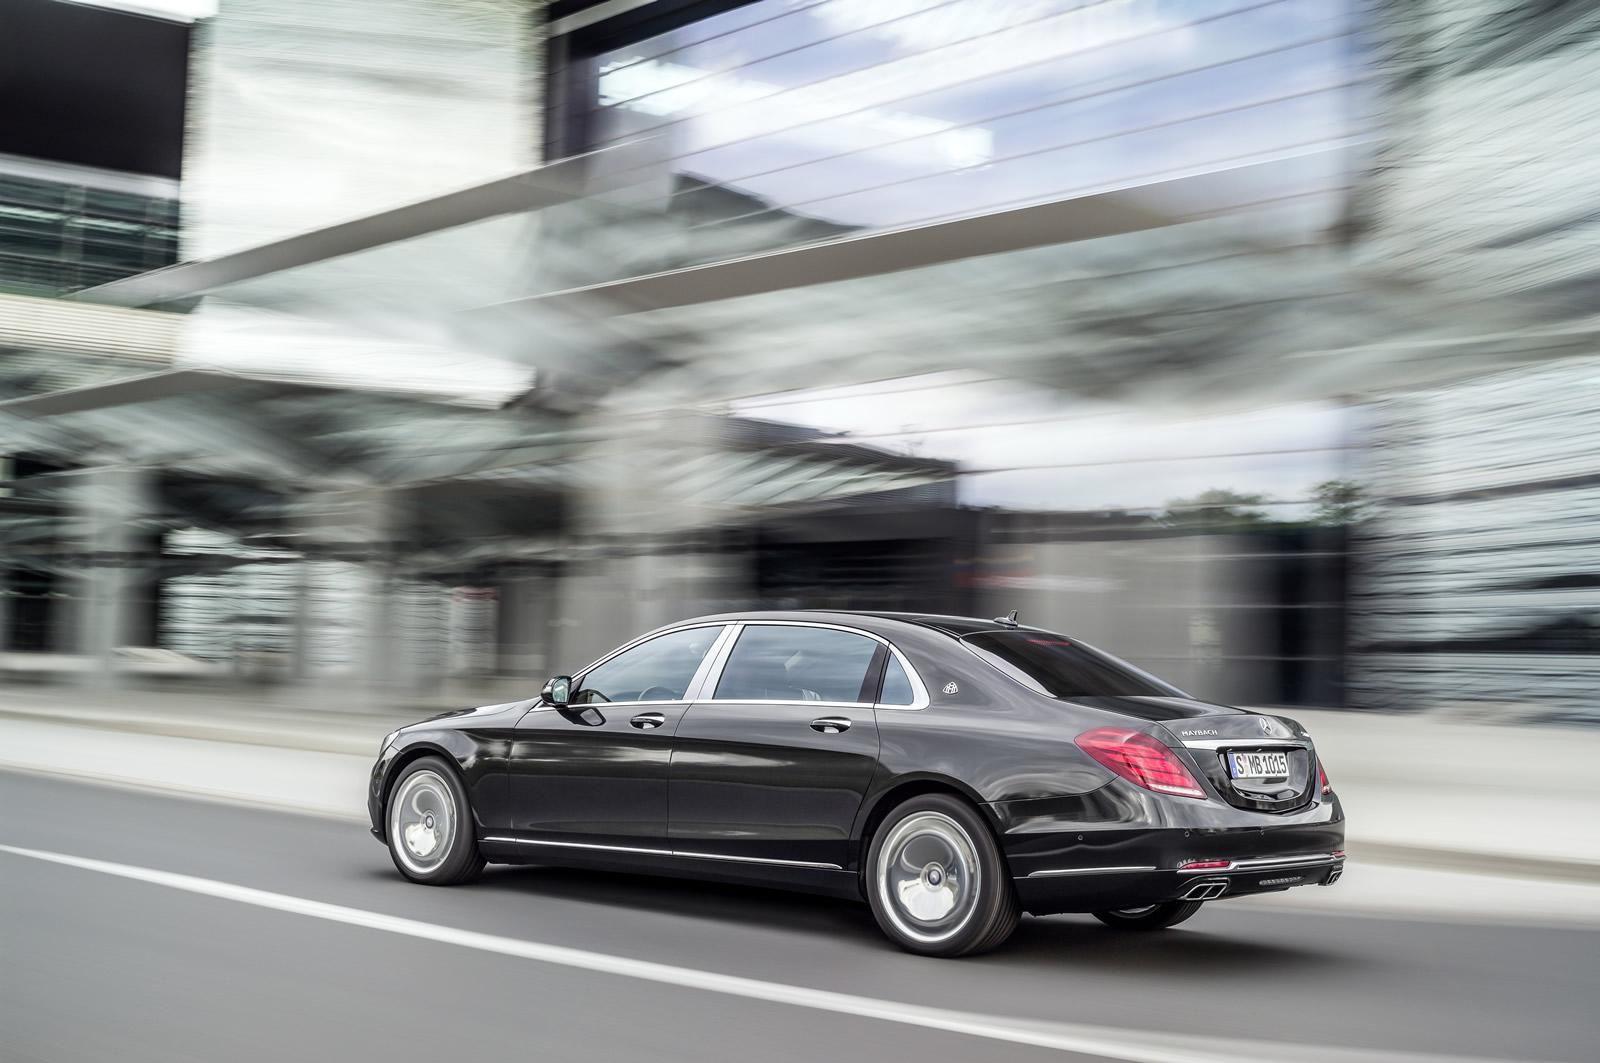 YEN 2015 MERCEDES MAYBACH S SERS RESM GALERS